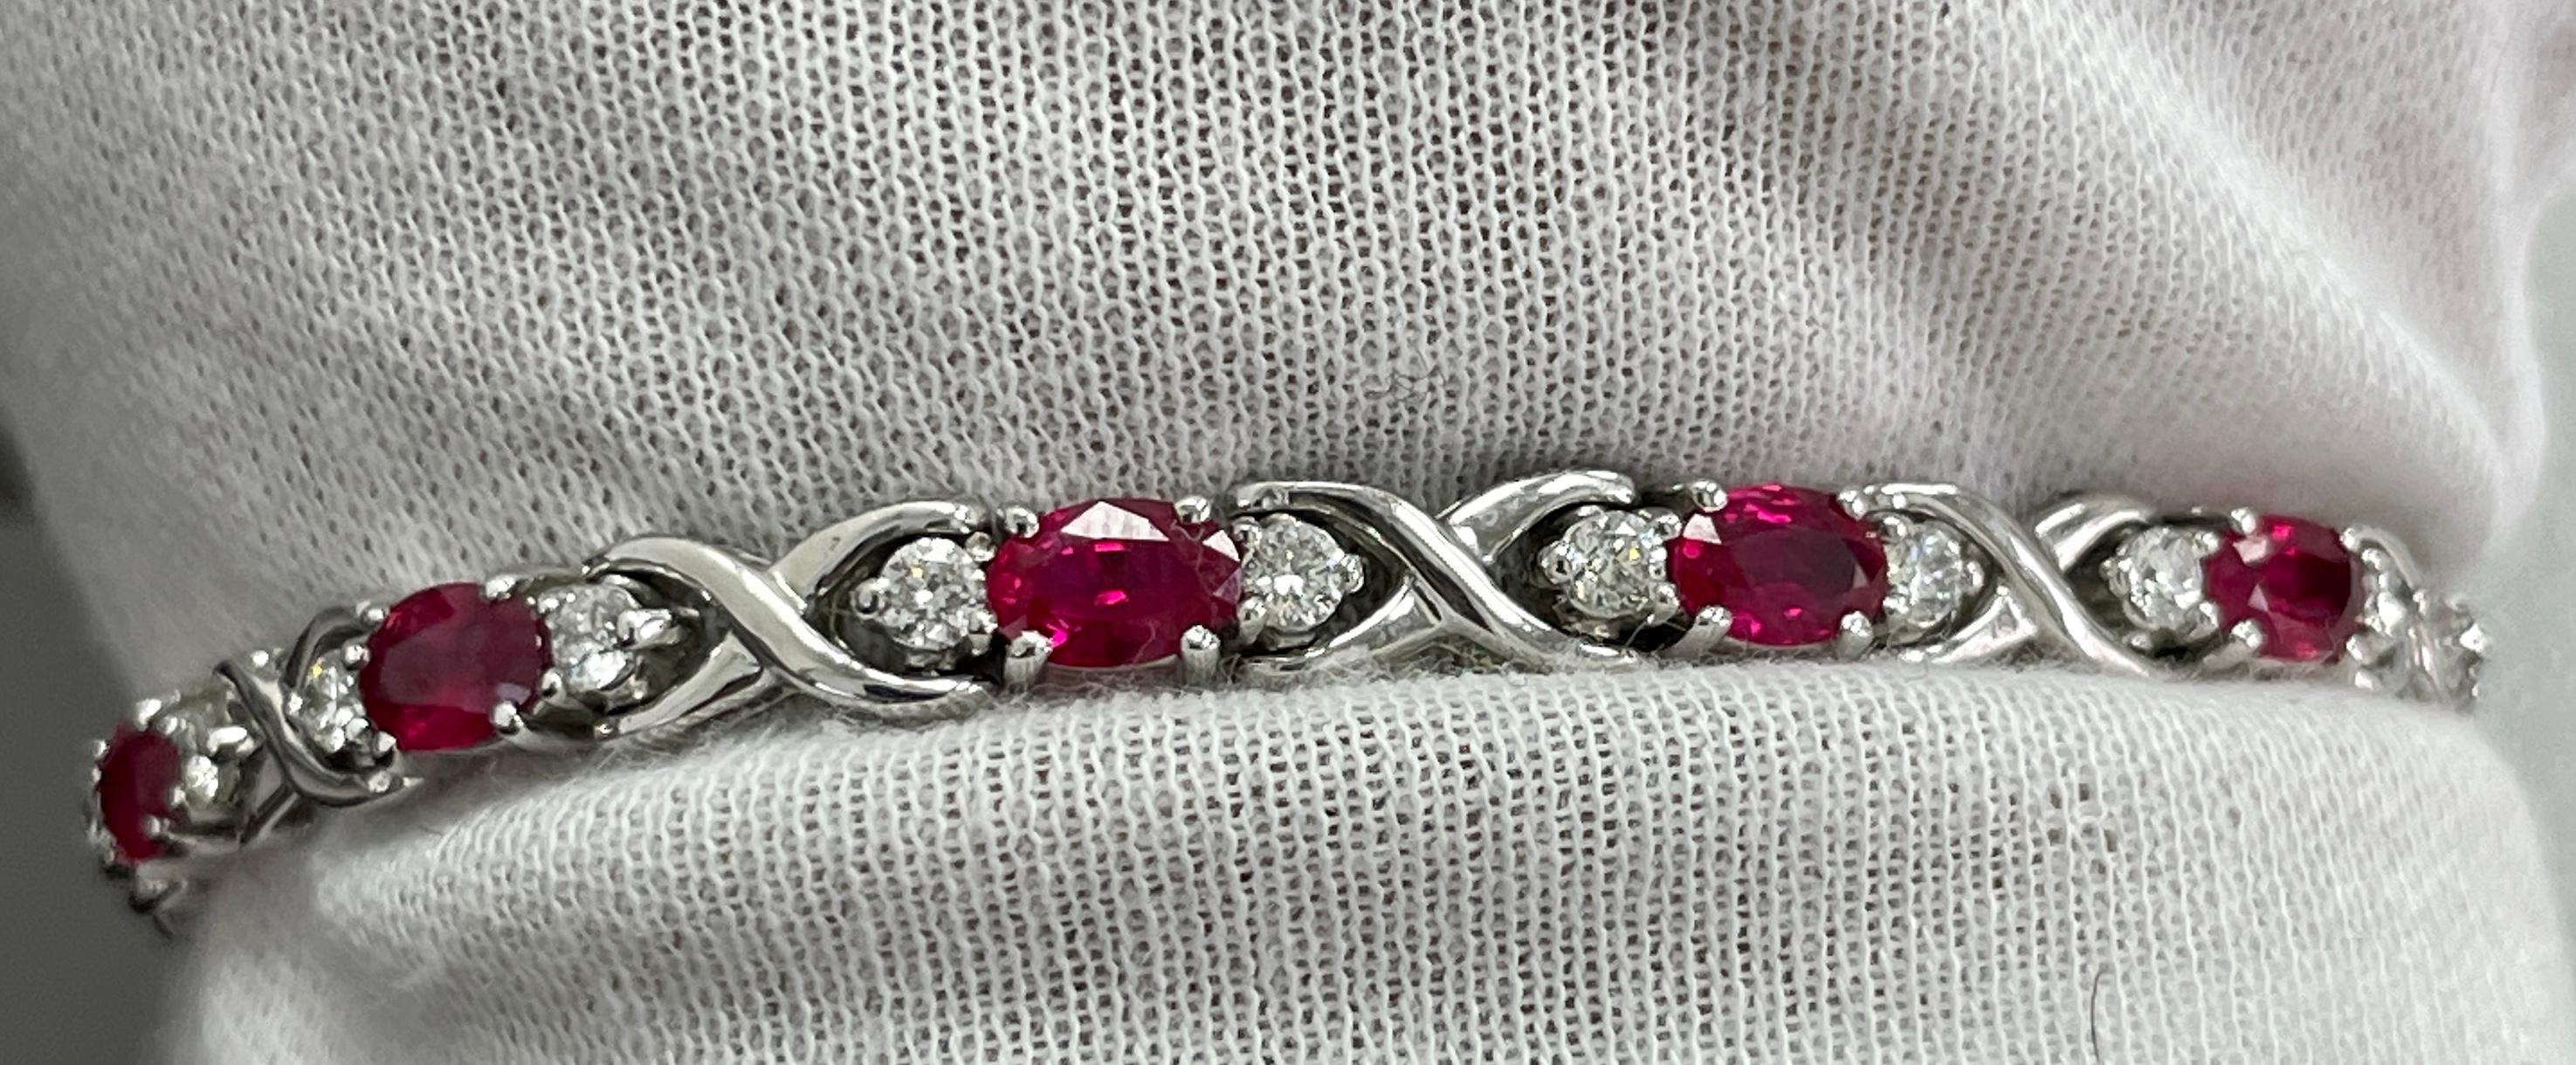 This bracelet holds STUNNING 5x3 oval vibrant rubies in a 14K white gold bracelet holding 1.40 carats of white diamonds